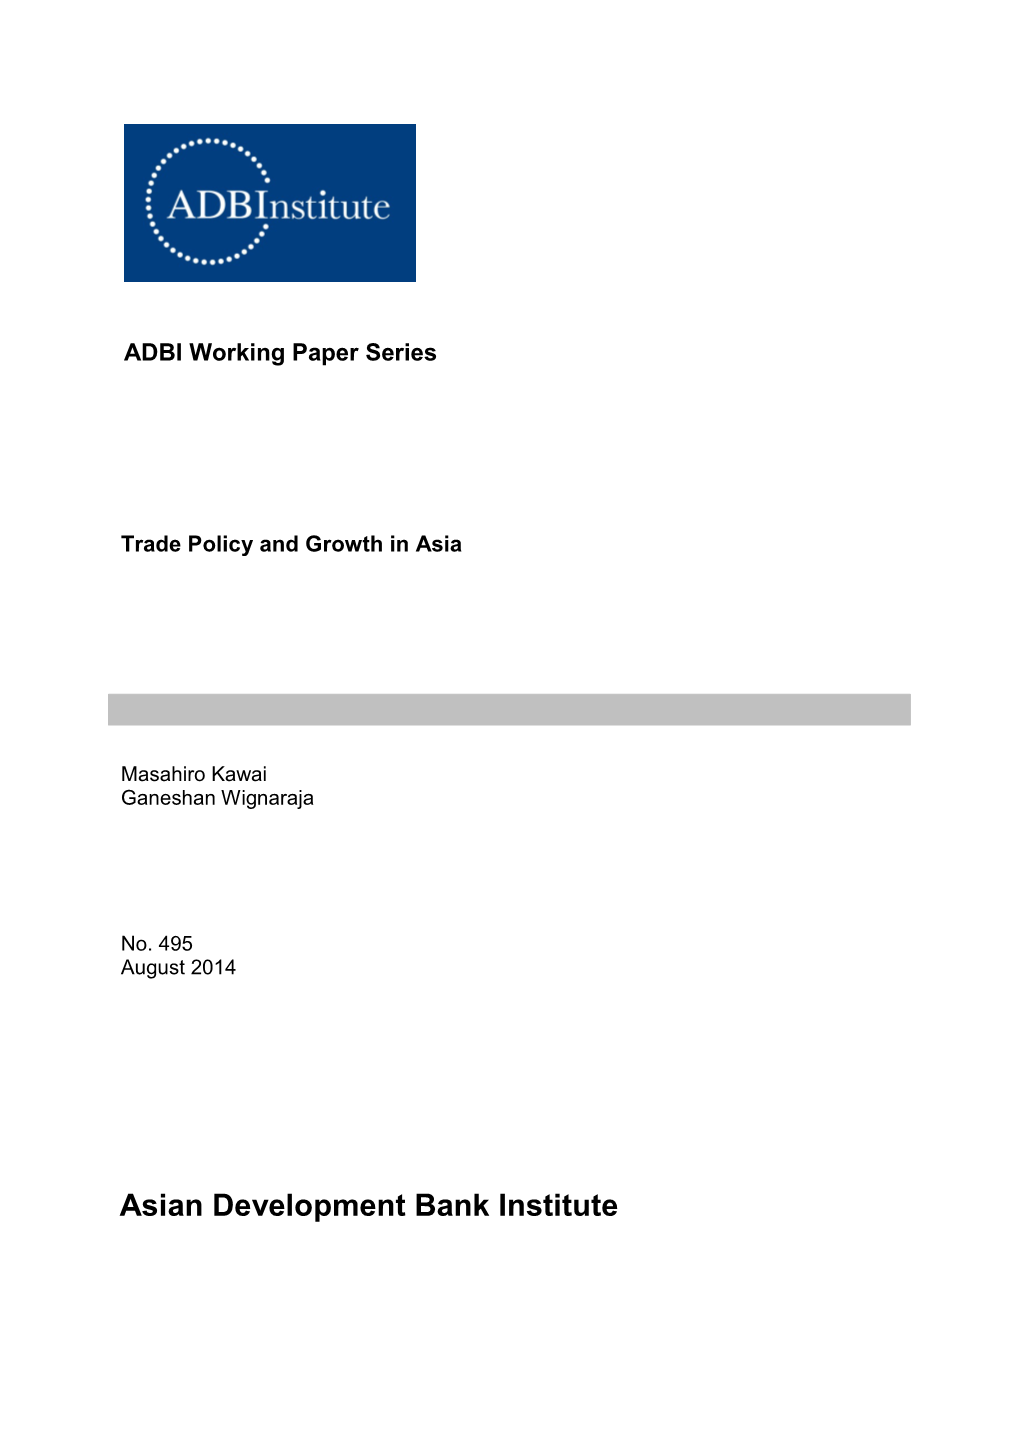 Trade Policy and Growth in Asia